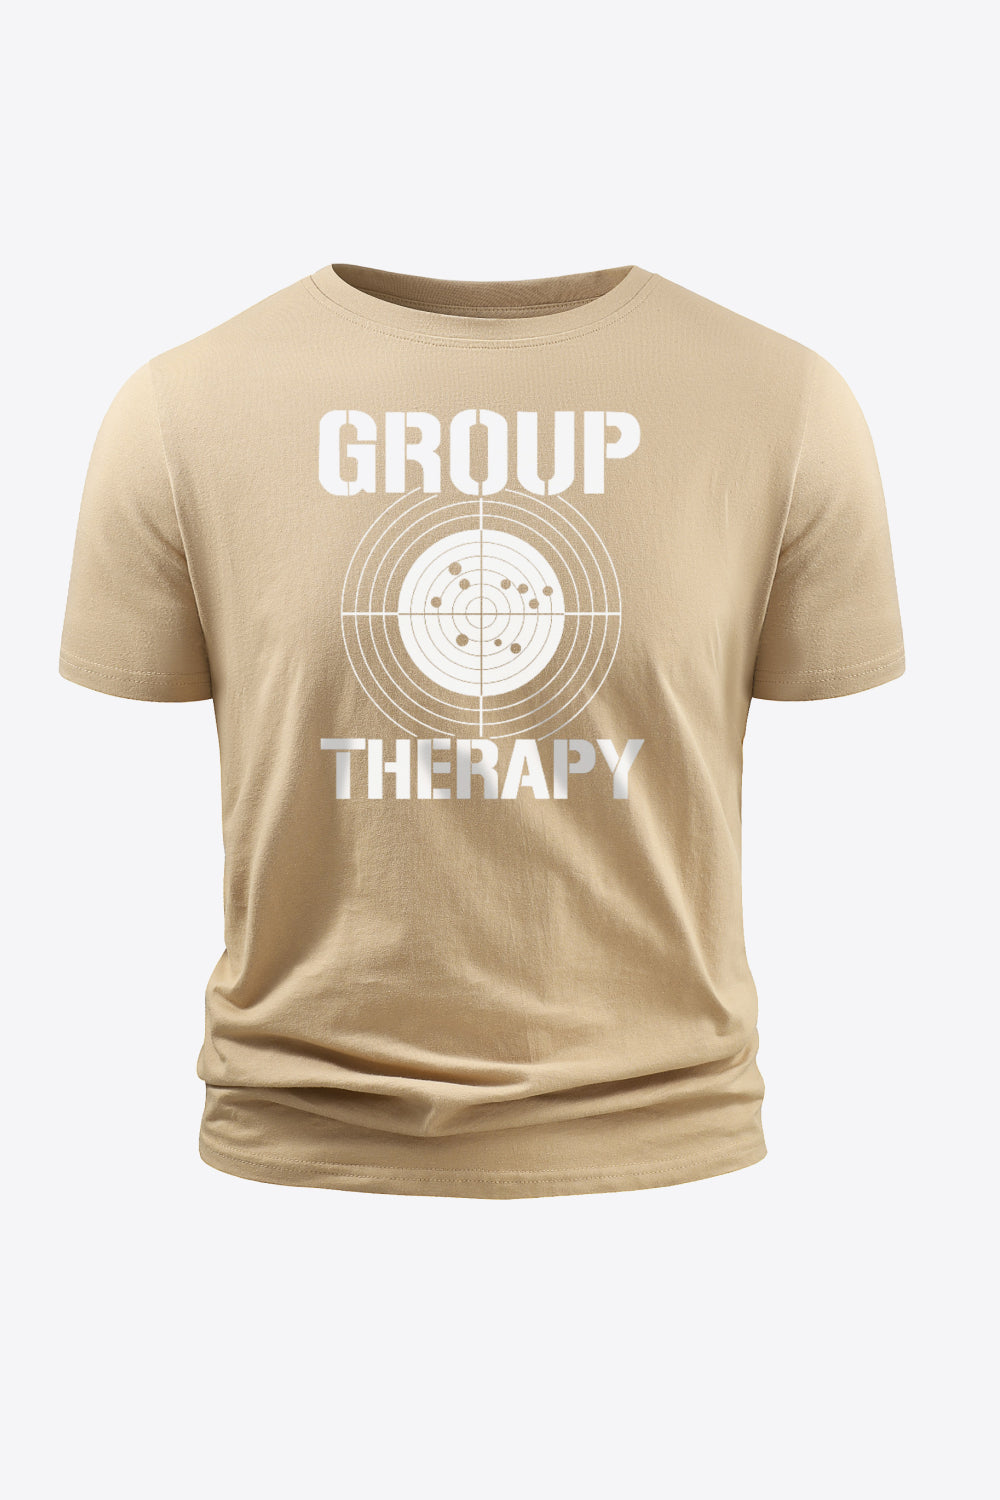 GROUP THERAPY Graphic Tee Shirt